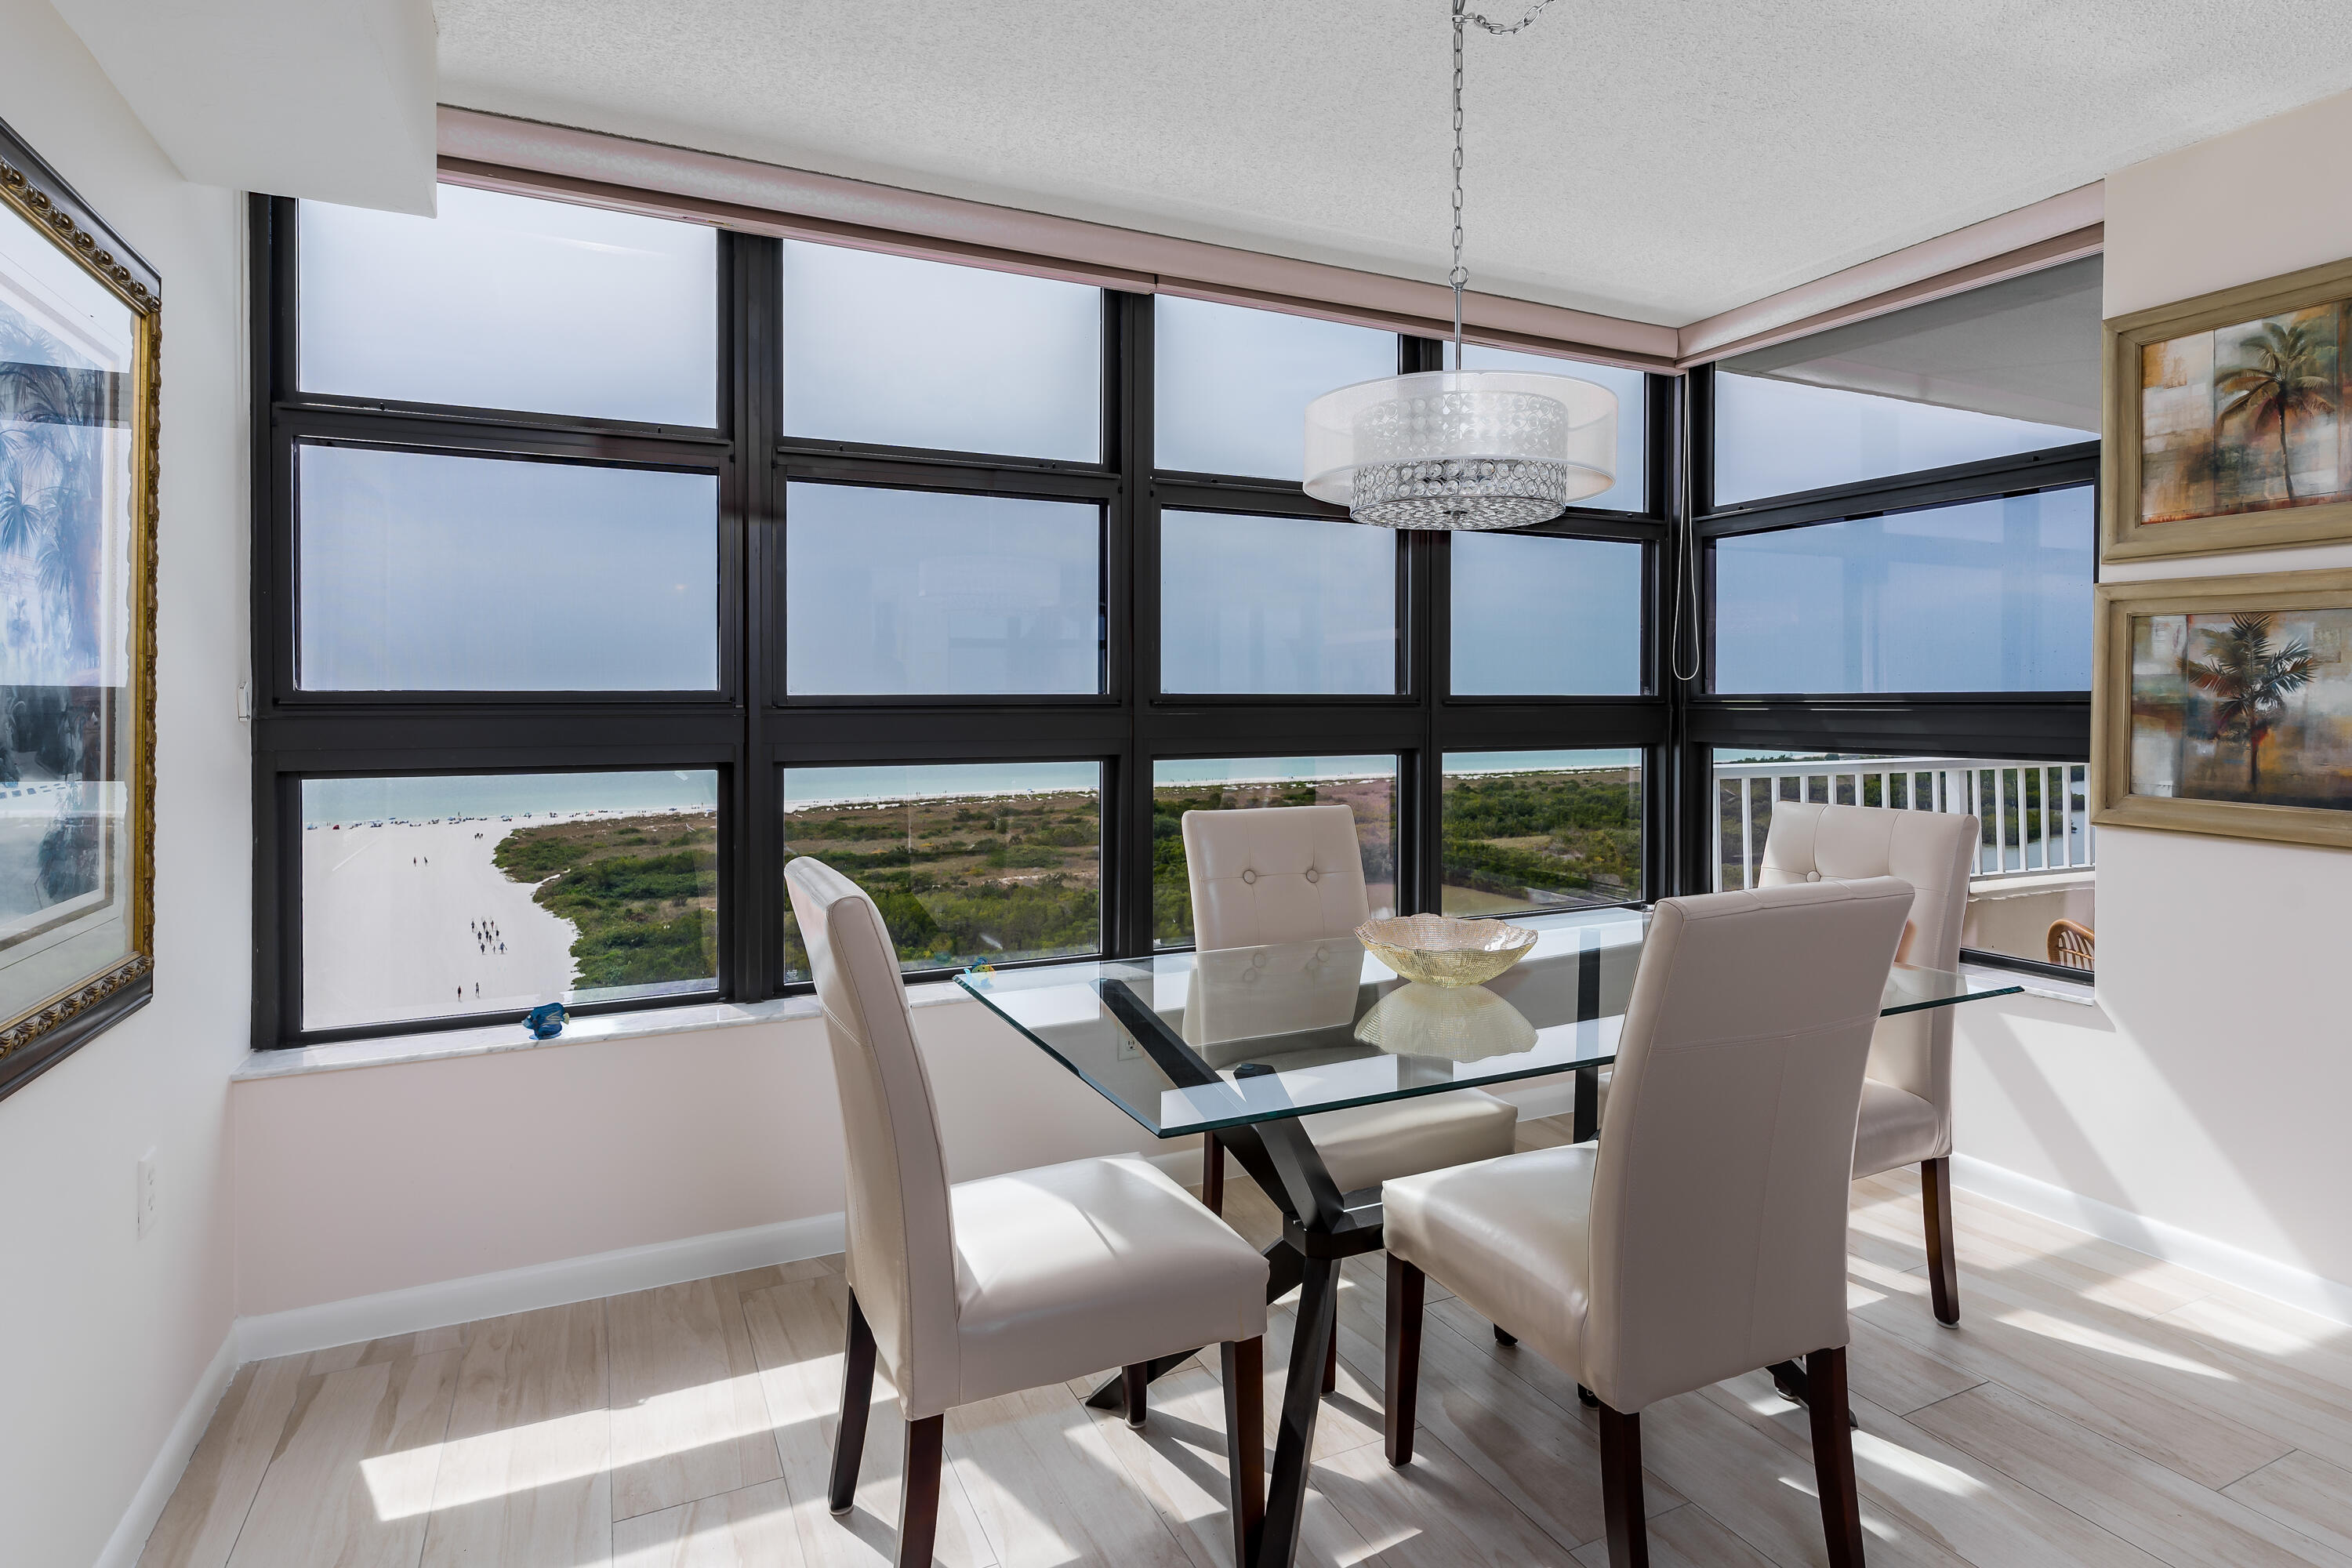 320 Seaview Ct Unit 1512, Marco Island, Florida, 34145, United States, 2 Bedrooms Bedrooms, ,2 BathroomsBathrooms,Residential,For Sale,320 Seaview Ct Unit 1512,1476618